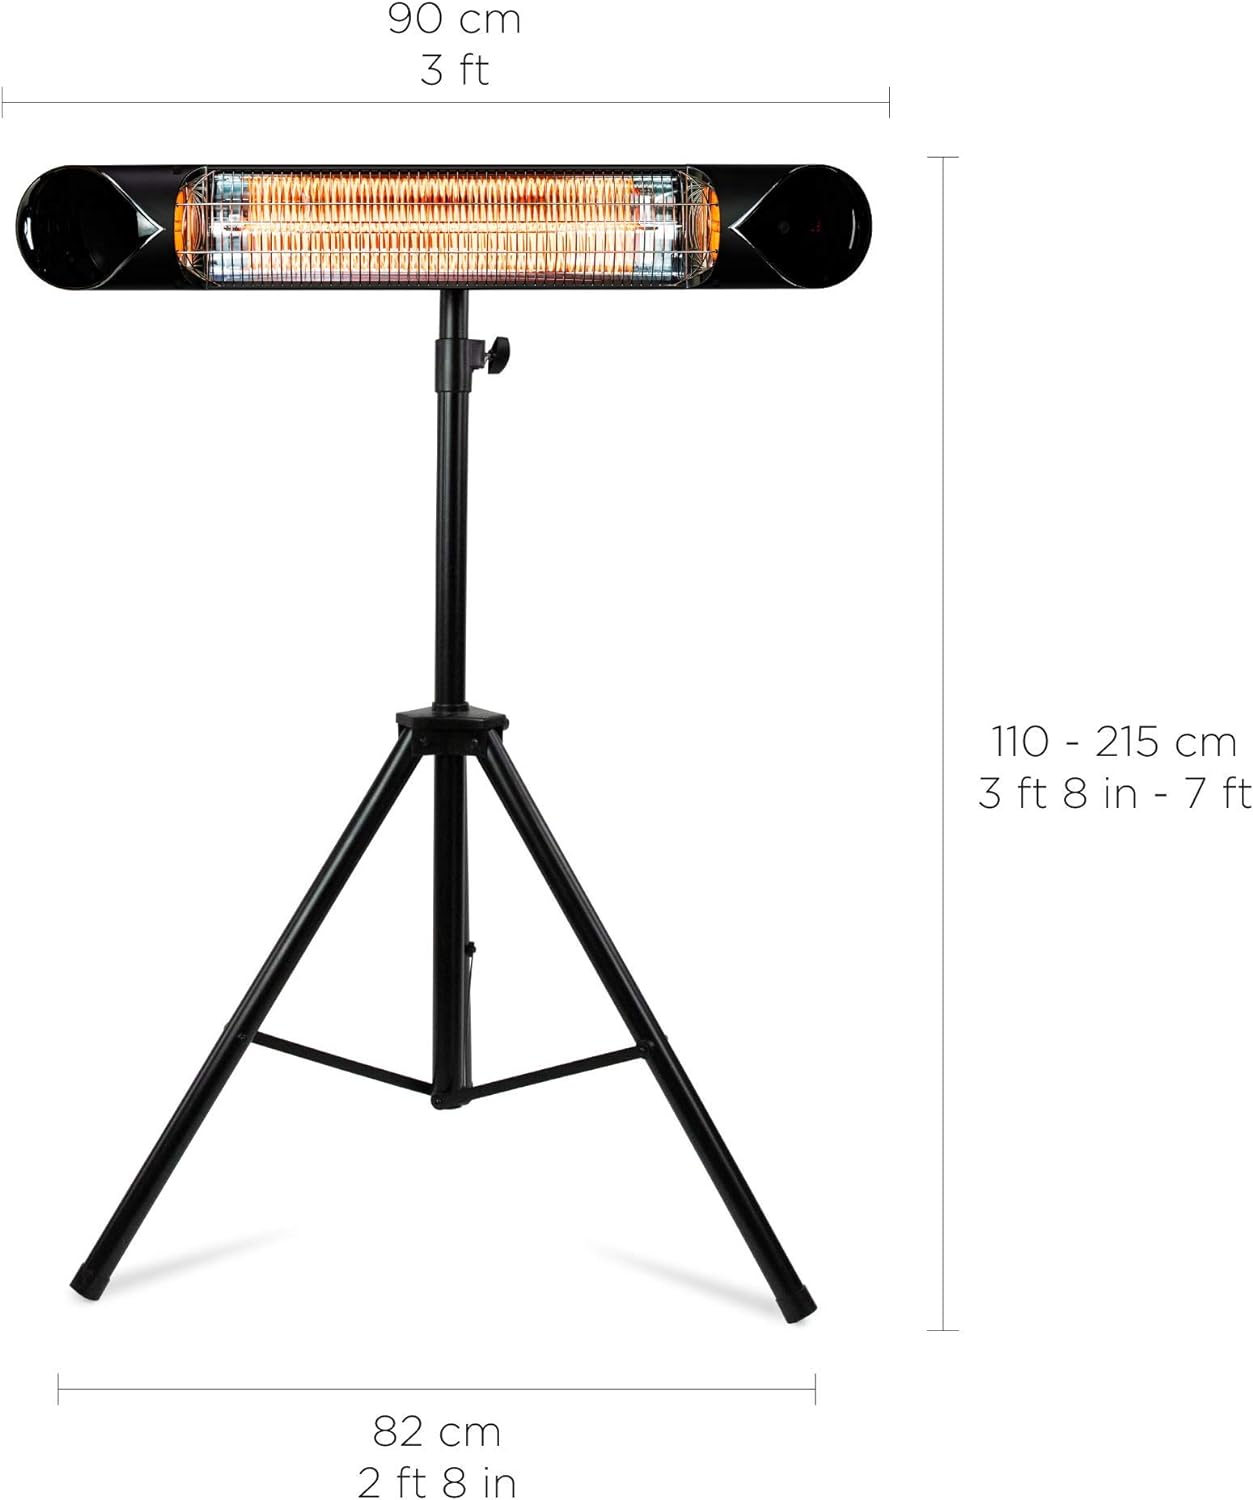 Briza Infrared Electric Patio Heater, Indoor/Outdoor, Portable Wall Heater - $140